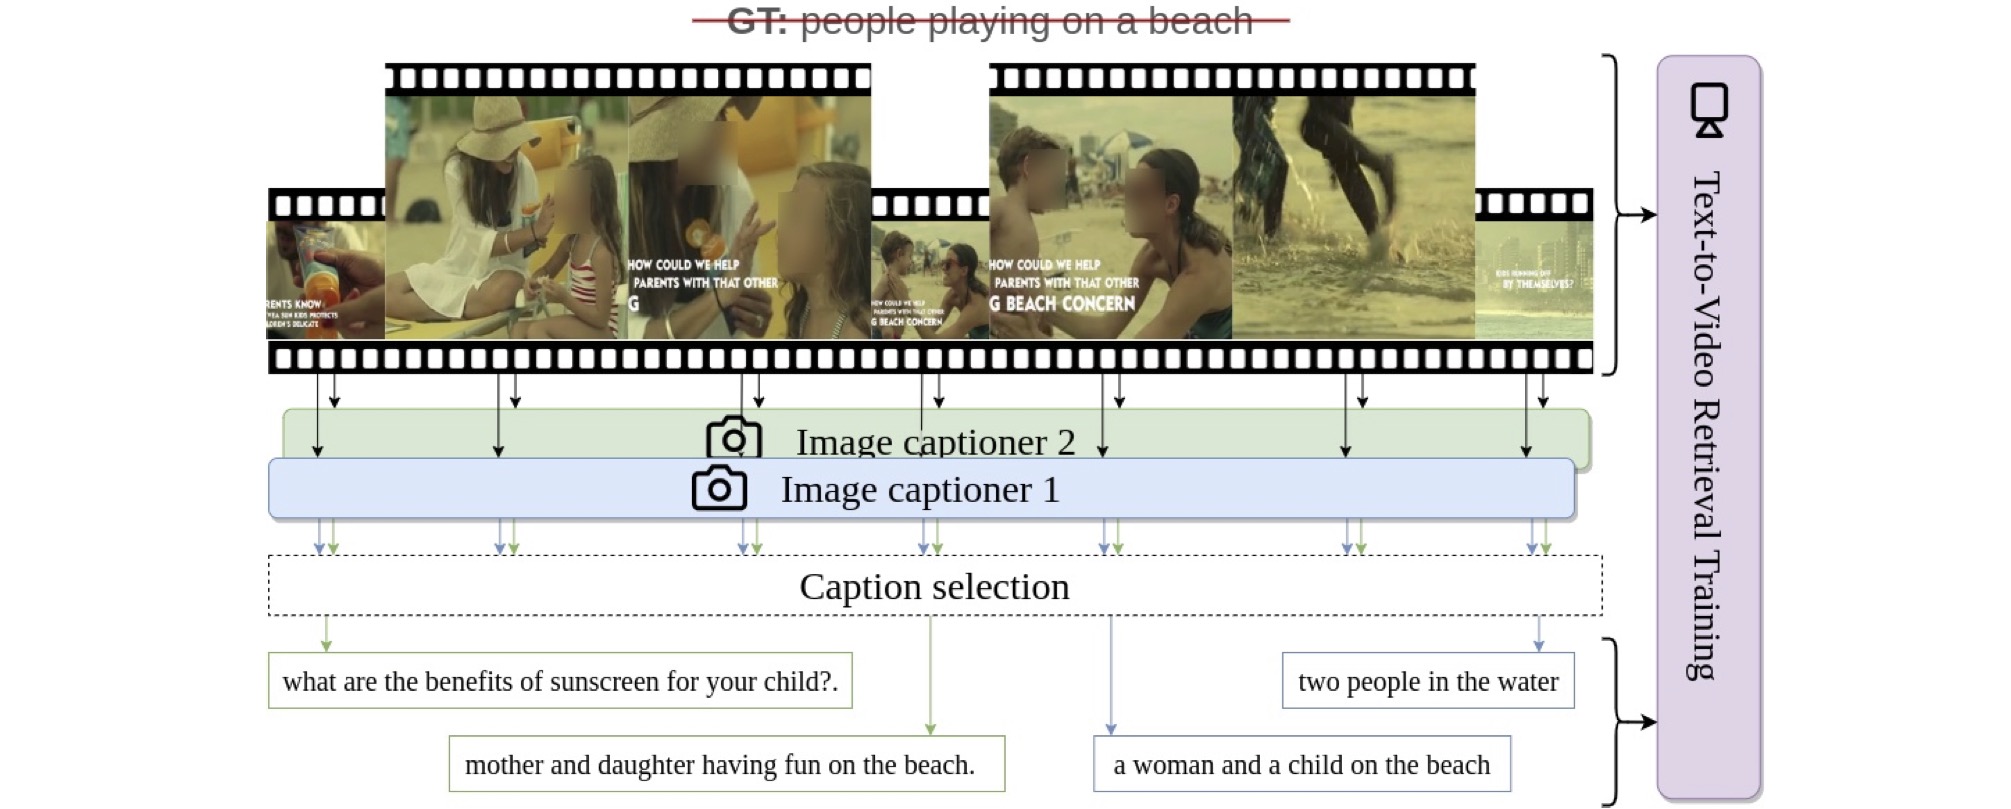 Learning text-to-video retrieval from image captioning